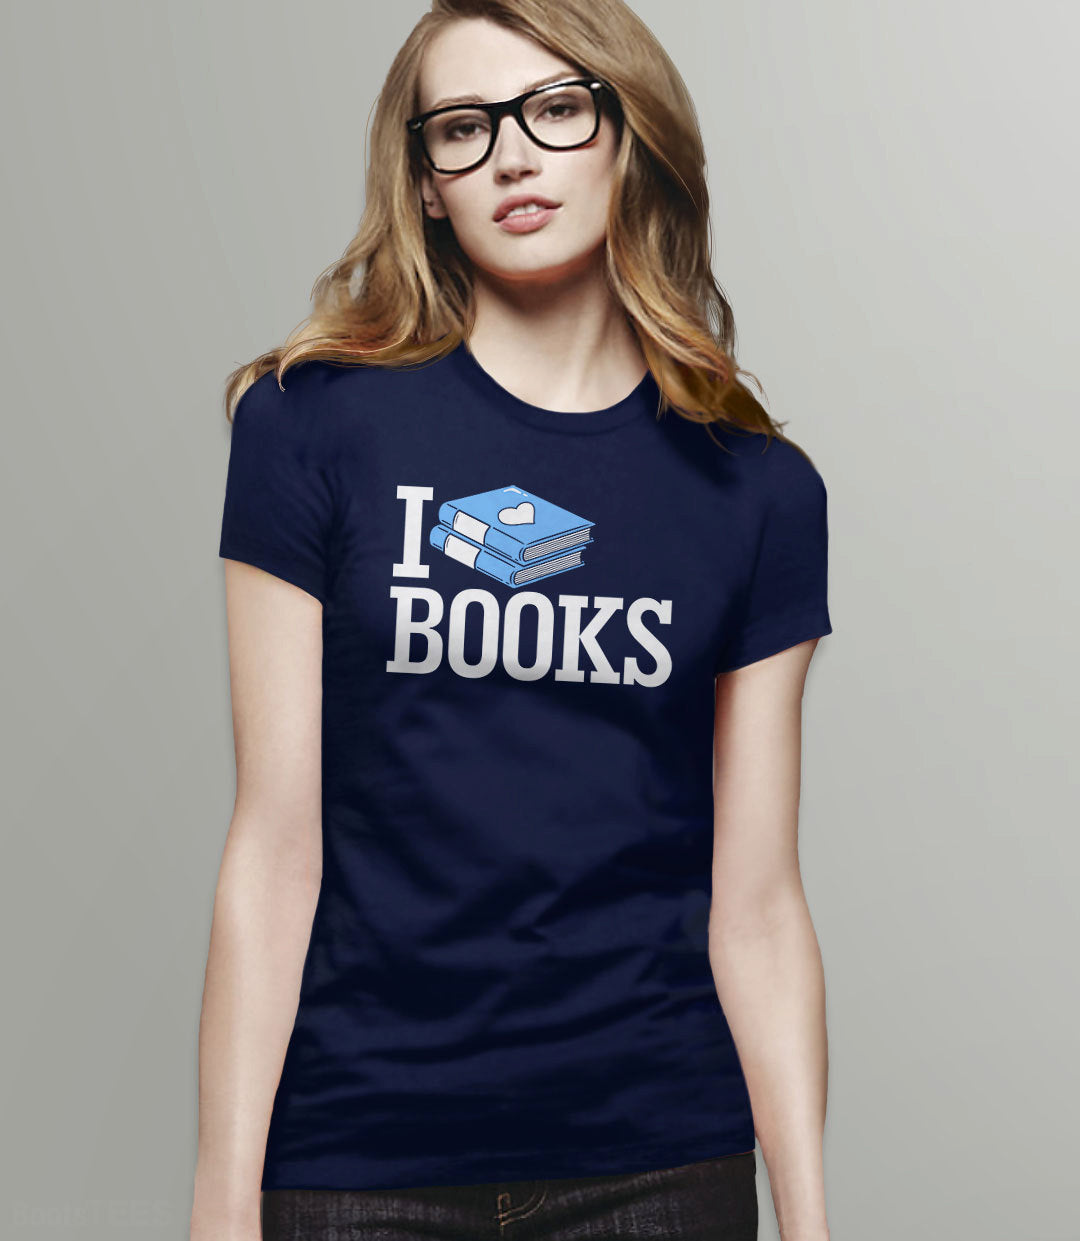 I Love Books Shirt | Funny Literary Shirt and Book Nerd Gift for Readers, Black Unisex S by BootsTees